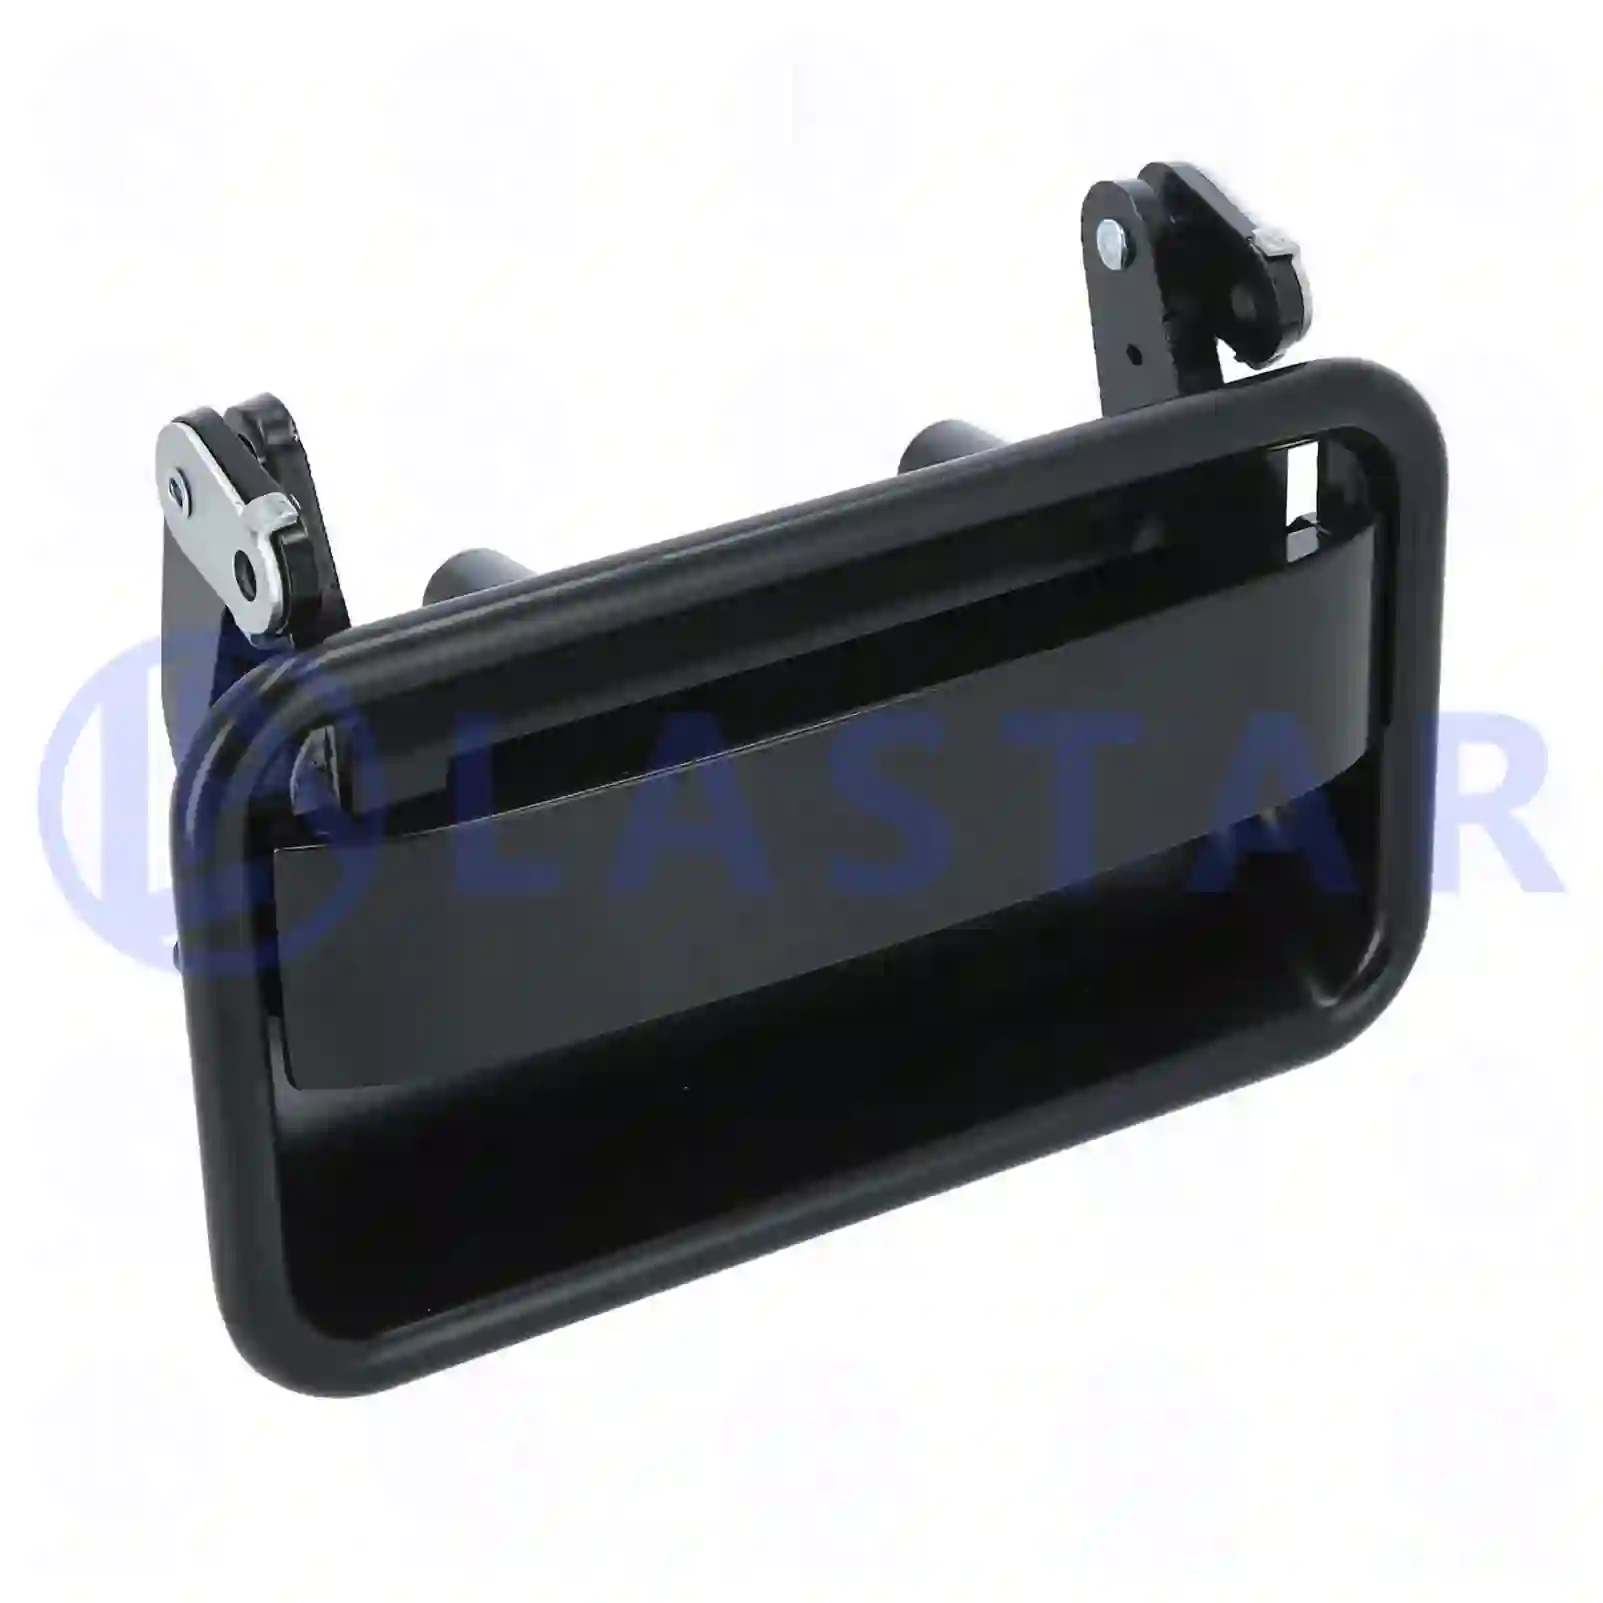 Door handle, outer, 77717929, 1614564, ZG60581-0008 ||  77717929 Lastar Spare Part | Truck Spare Parts, Auotomotive Spare Parts Door handle, outer, 77717929, 1614564, ZG60581-0008 ||  77717929 Lastar Spare Part | Truck Spare Parts, Auotomotive Spare Parts